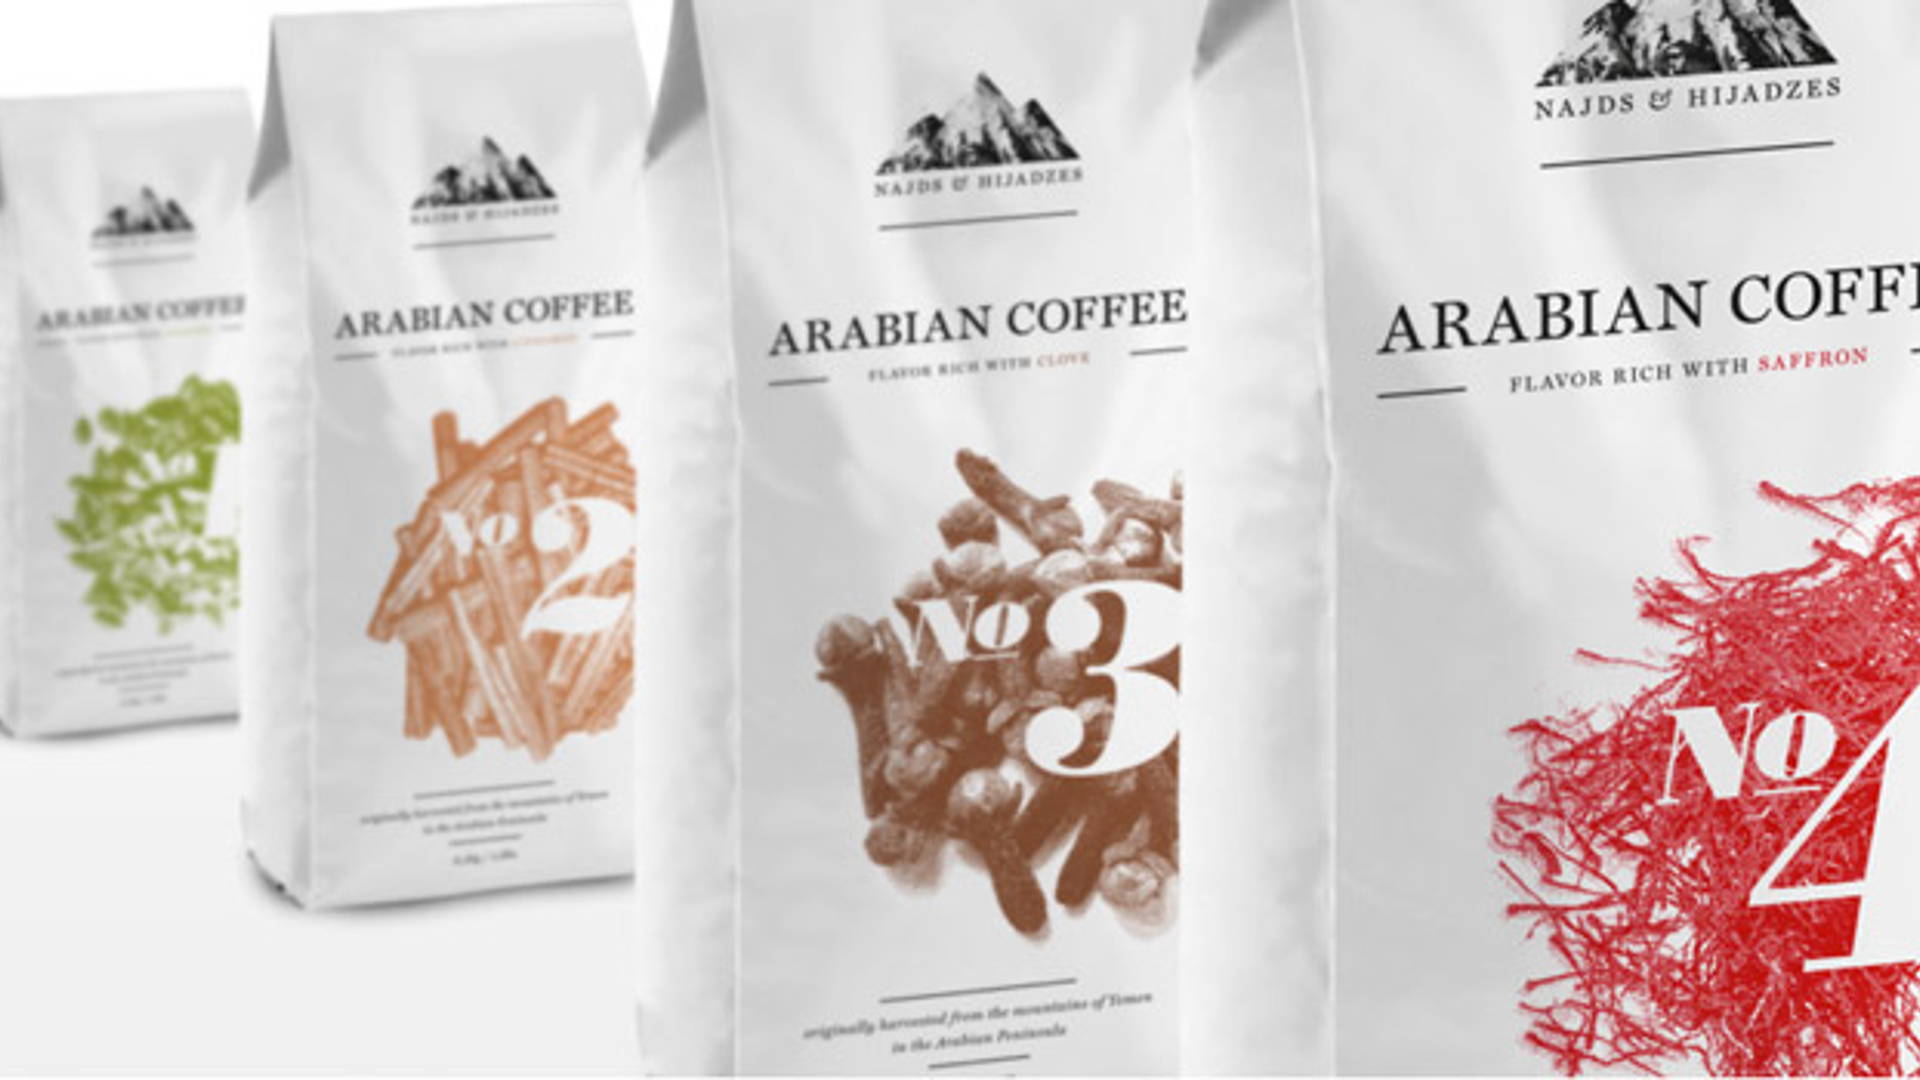 Featured image for Najds & Hijadzes Coffee Concept